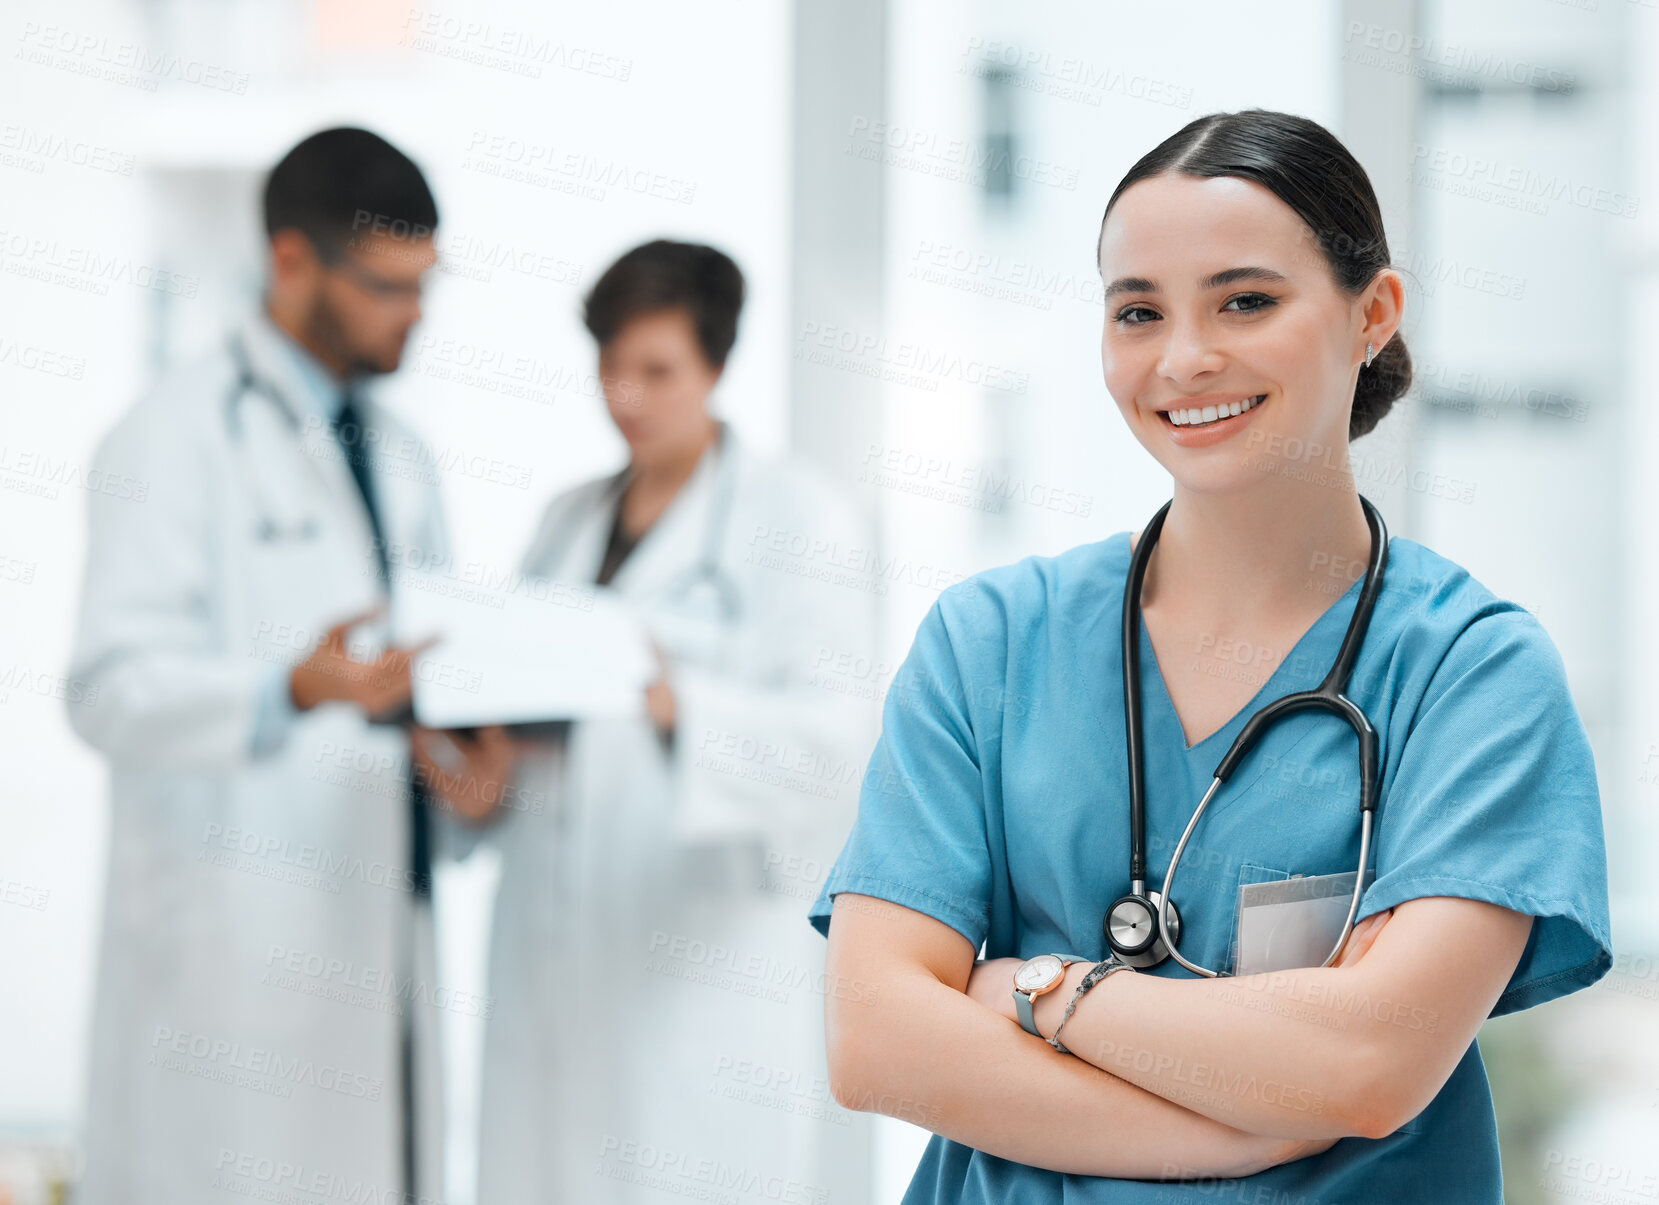 Buy stock photo Shot of a young female doctor standing with her arms crossed at a hospital